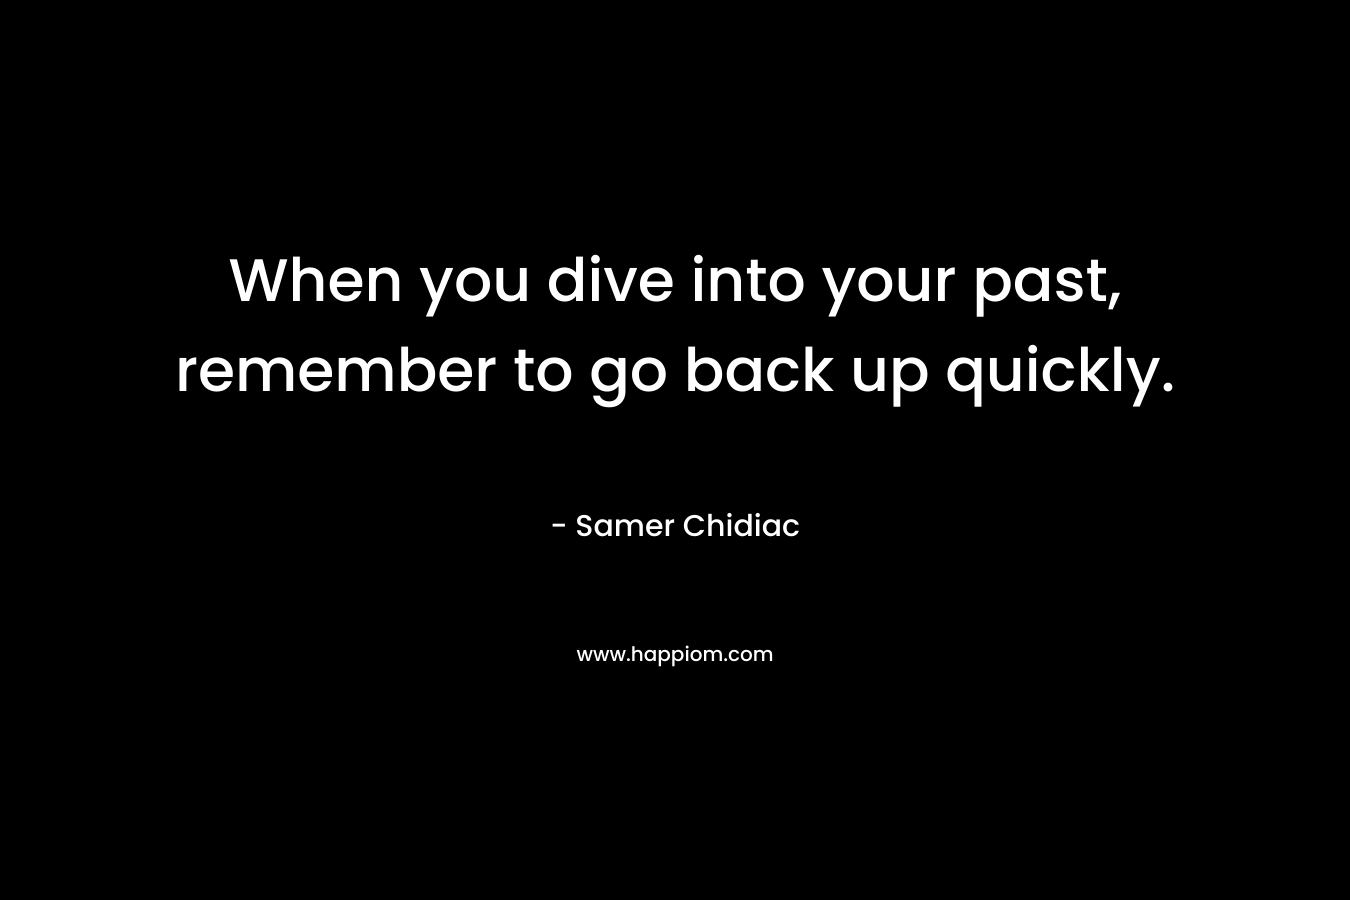 When you dive into your past, remember to go back up quickly.